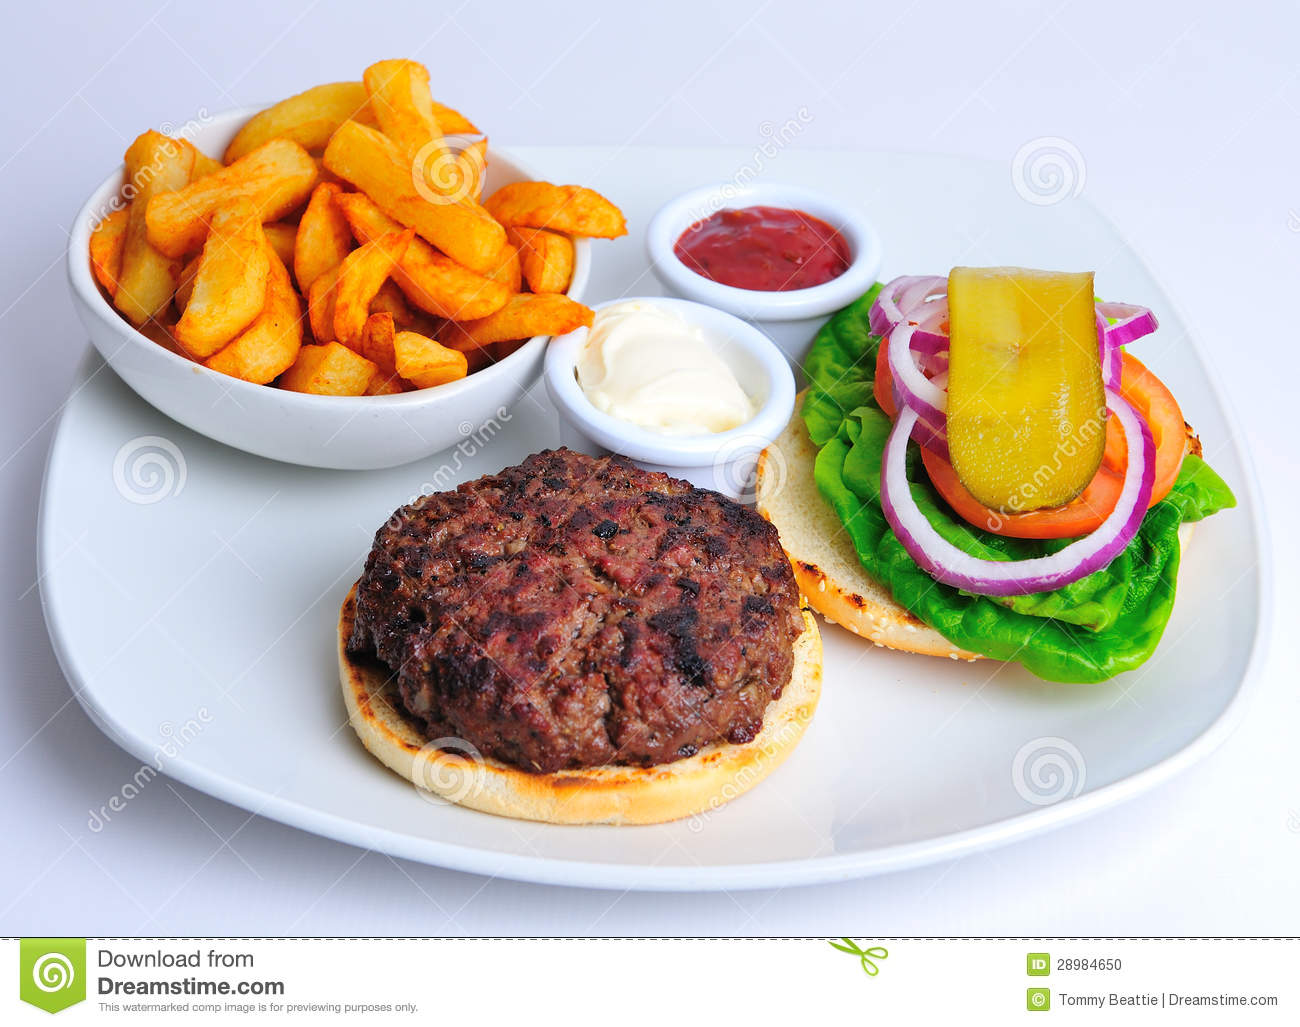 Beef Burger And Chips Stock Photo   Image  28984650